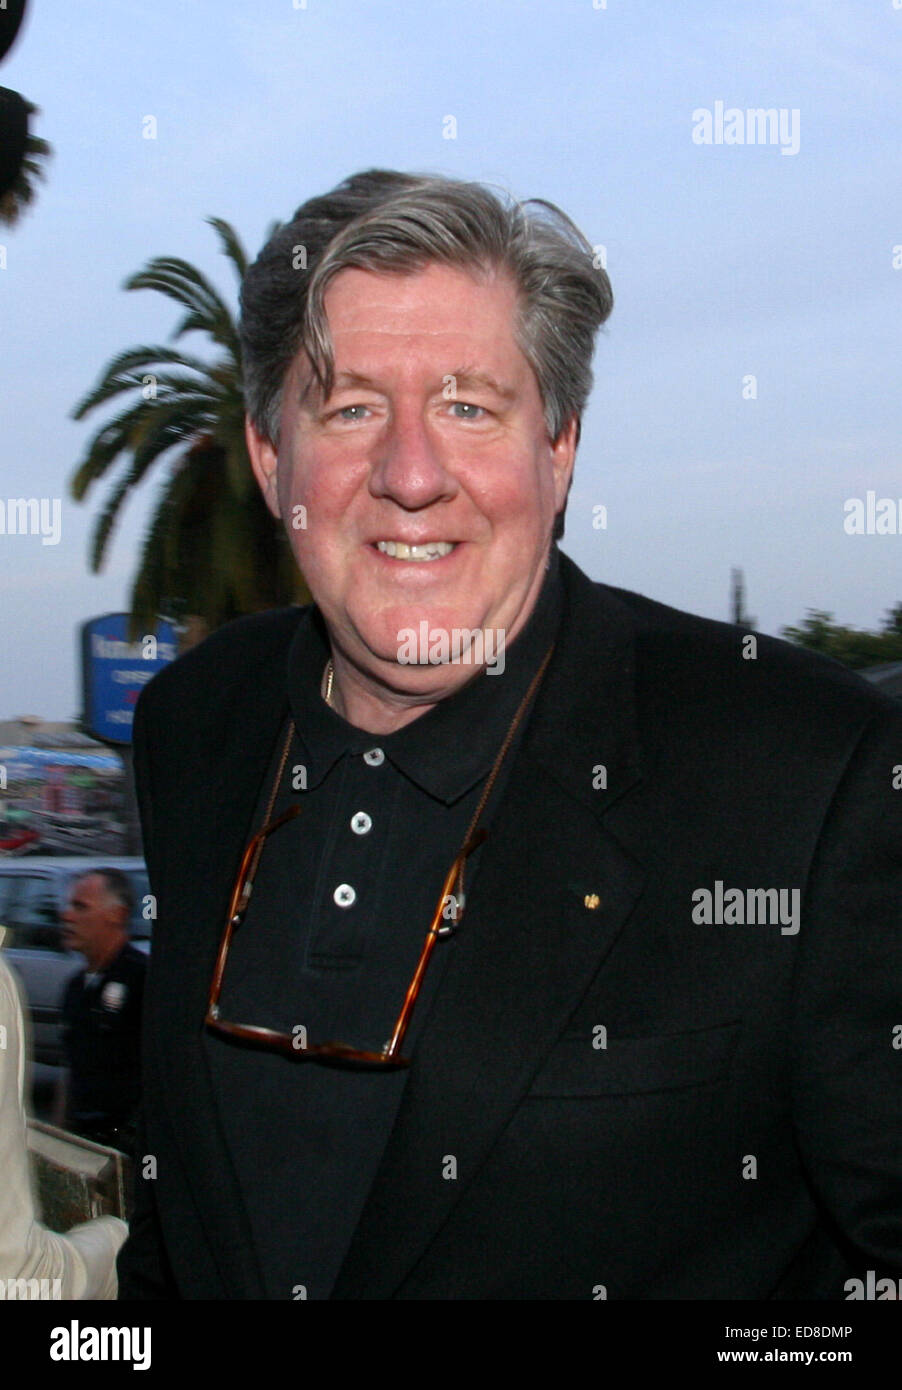 File. 31st Dec, 2014. EDWARD HERRMANN (July 21, 1943 - December 31, 2014) was an American actor, director, writer, and comedian, best known for his Emmy-nominated portrayals of Franklin D. Roosevelt on television, Richard Gilmore in Gilmore Girls, a ubiquitous narrator for historical programs on The History Channel and in such PBS productions as Nova, and as a spokesman for Dodge automobiles in the 1990s. Pictured - Apr 10, 2002 - Los Angeles, California, U.S. - Actor Edward Herrmann at the premiere of 'The Cat's Meow.' © Robert Millard/ZUMA Wire/Alamy Live News Stock Photo